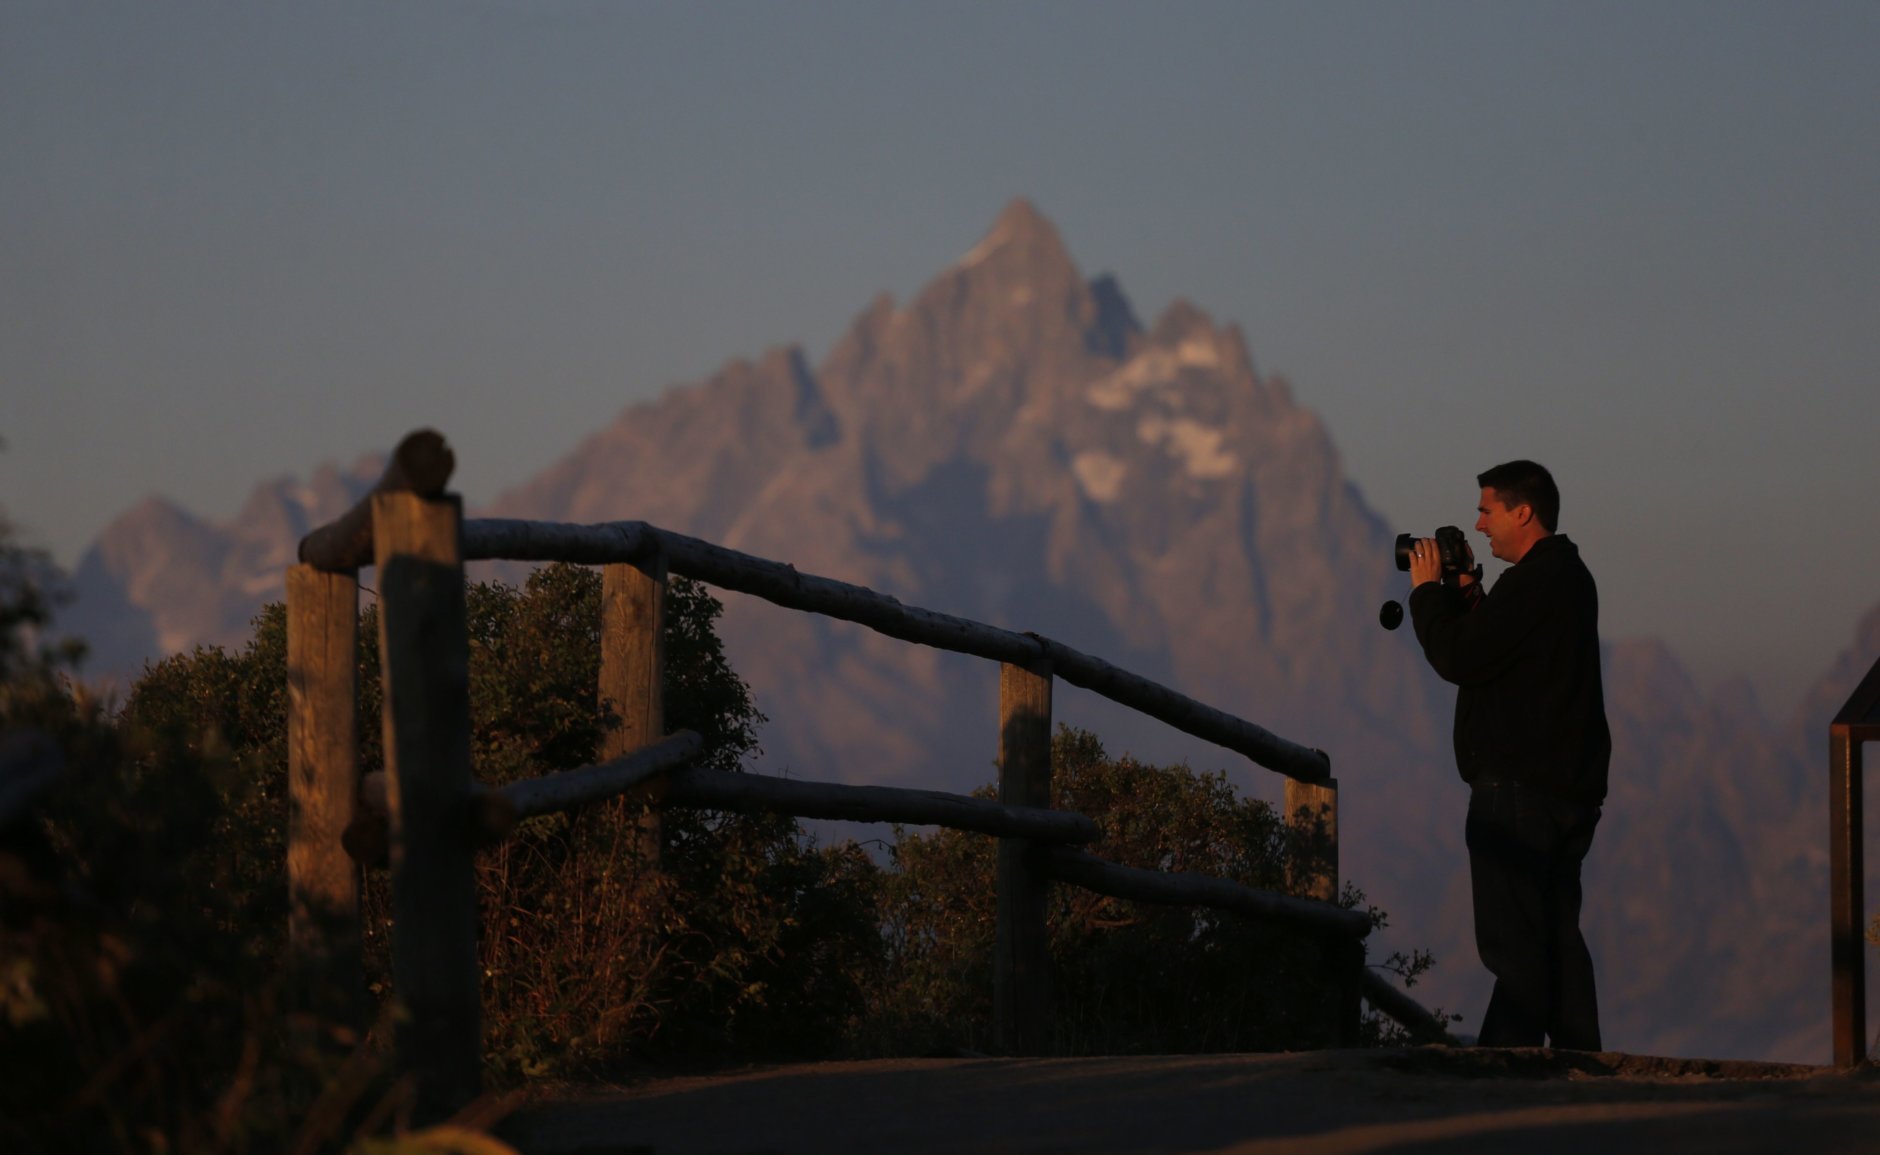 Park visitor Michael Quaide takes a picture as the sun at dawn illuminates mountain peaks, partially obscured by haze from the wildfires nearby as seen from Signal Mountain in Grand Teton National Park, Wyo., Aug 25, 2016. Aug 25, 2016 marked the 100th anniversary of the US National Park Service. (AP Photo/Brennan Linsley)